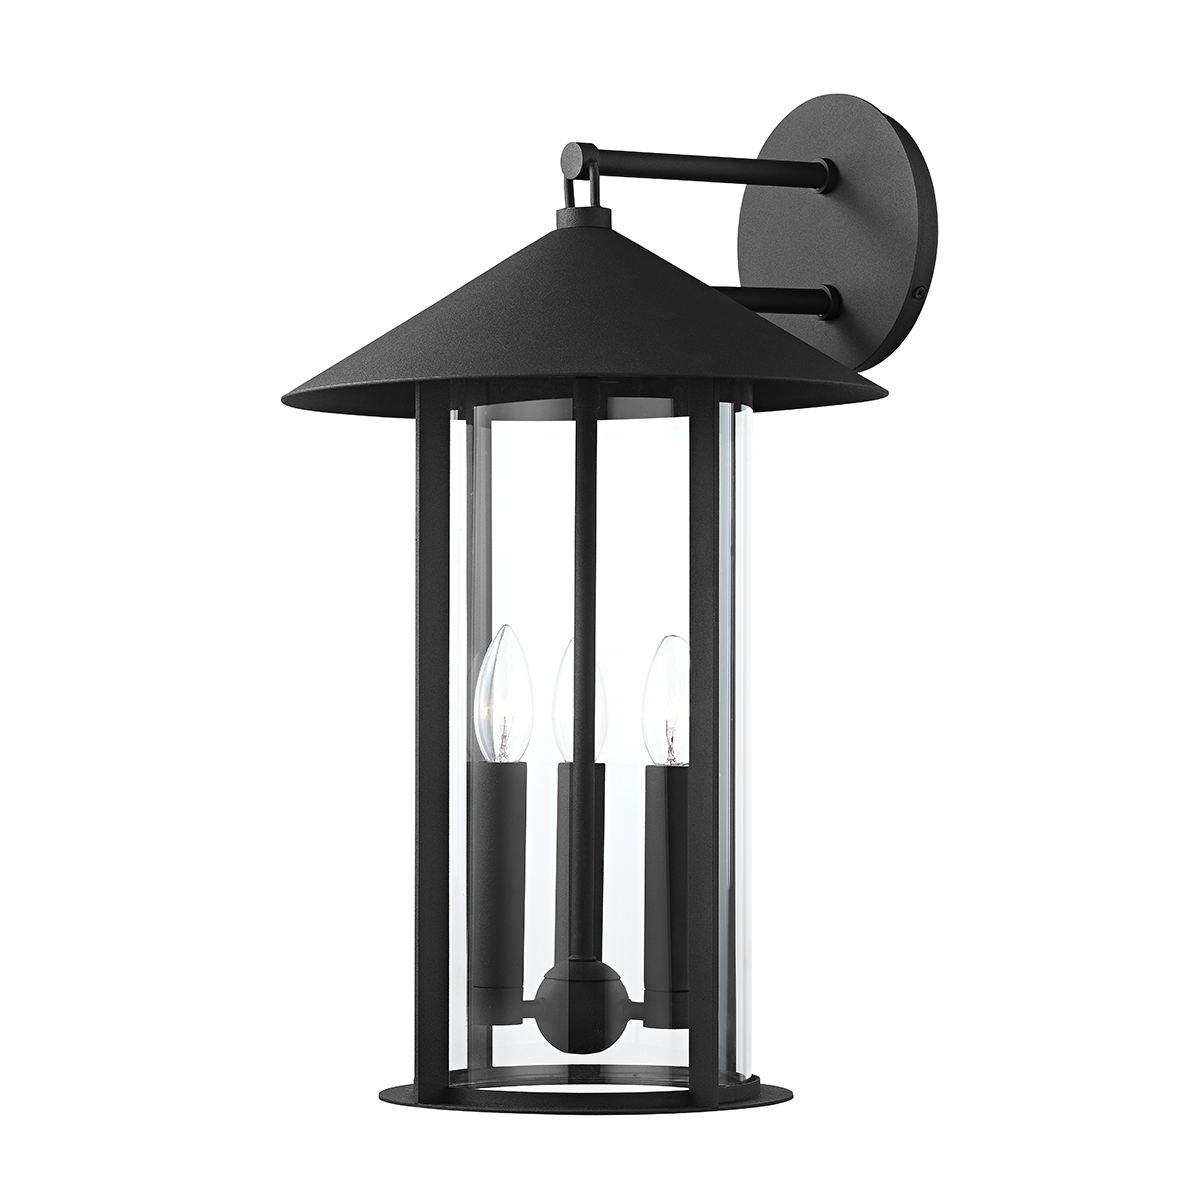 Troy Lighting 4 LIGHT EXTERIOR WALL SCONCE B1953 Outdoor l Wall Troy Lighting TEXTURE BLACK  